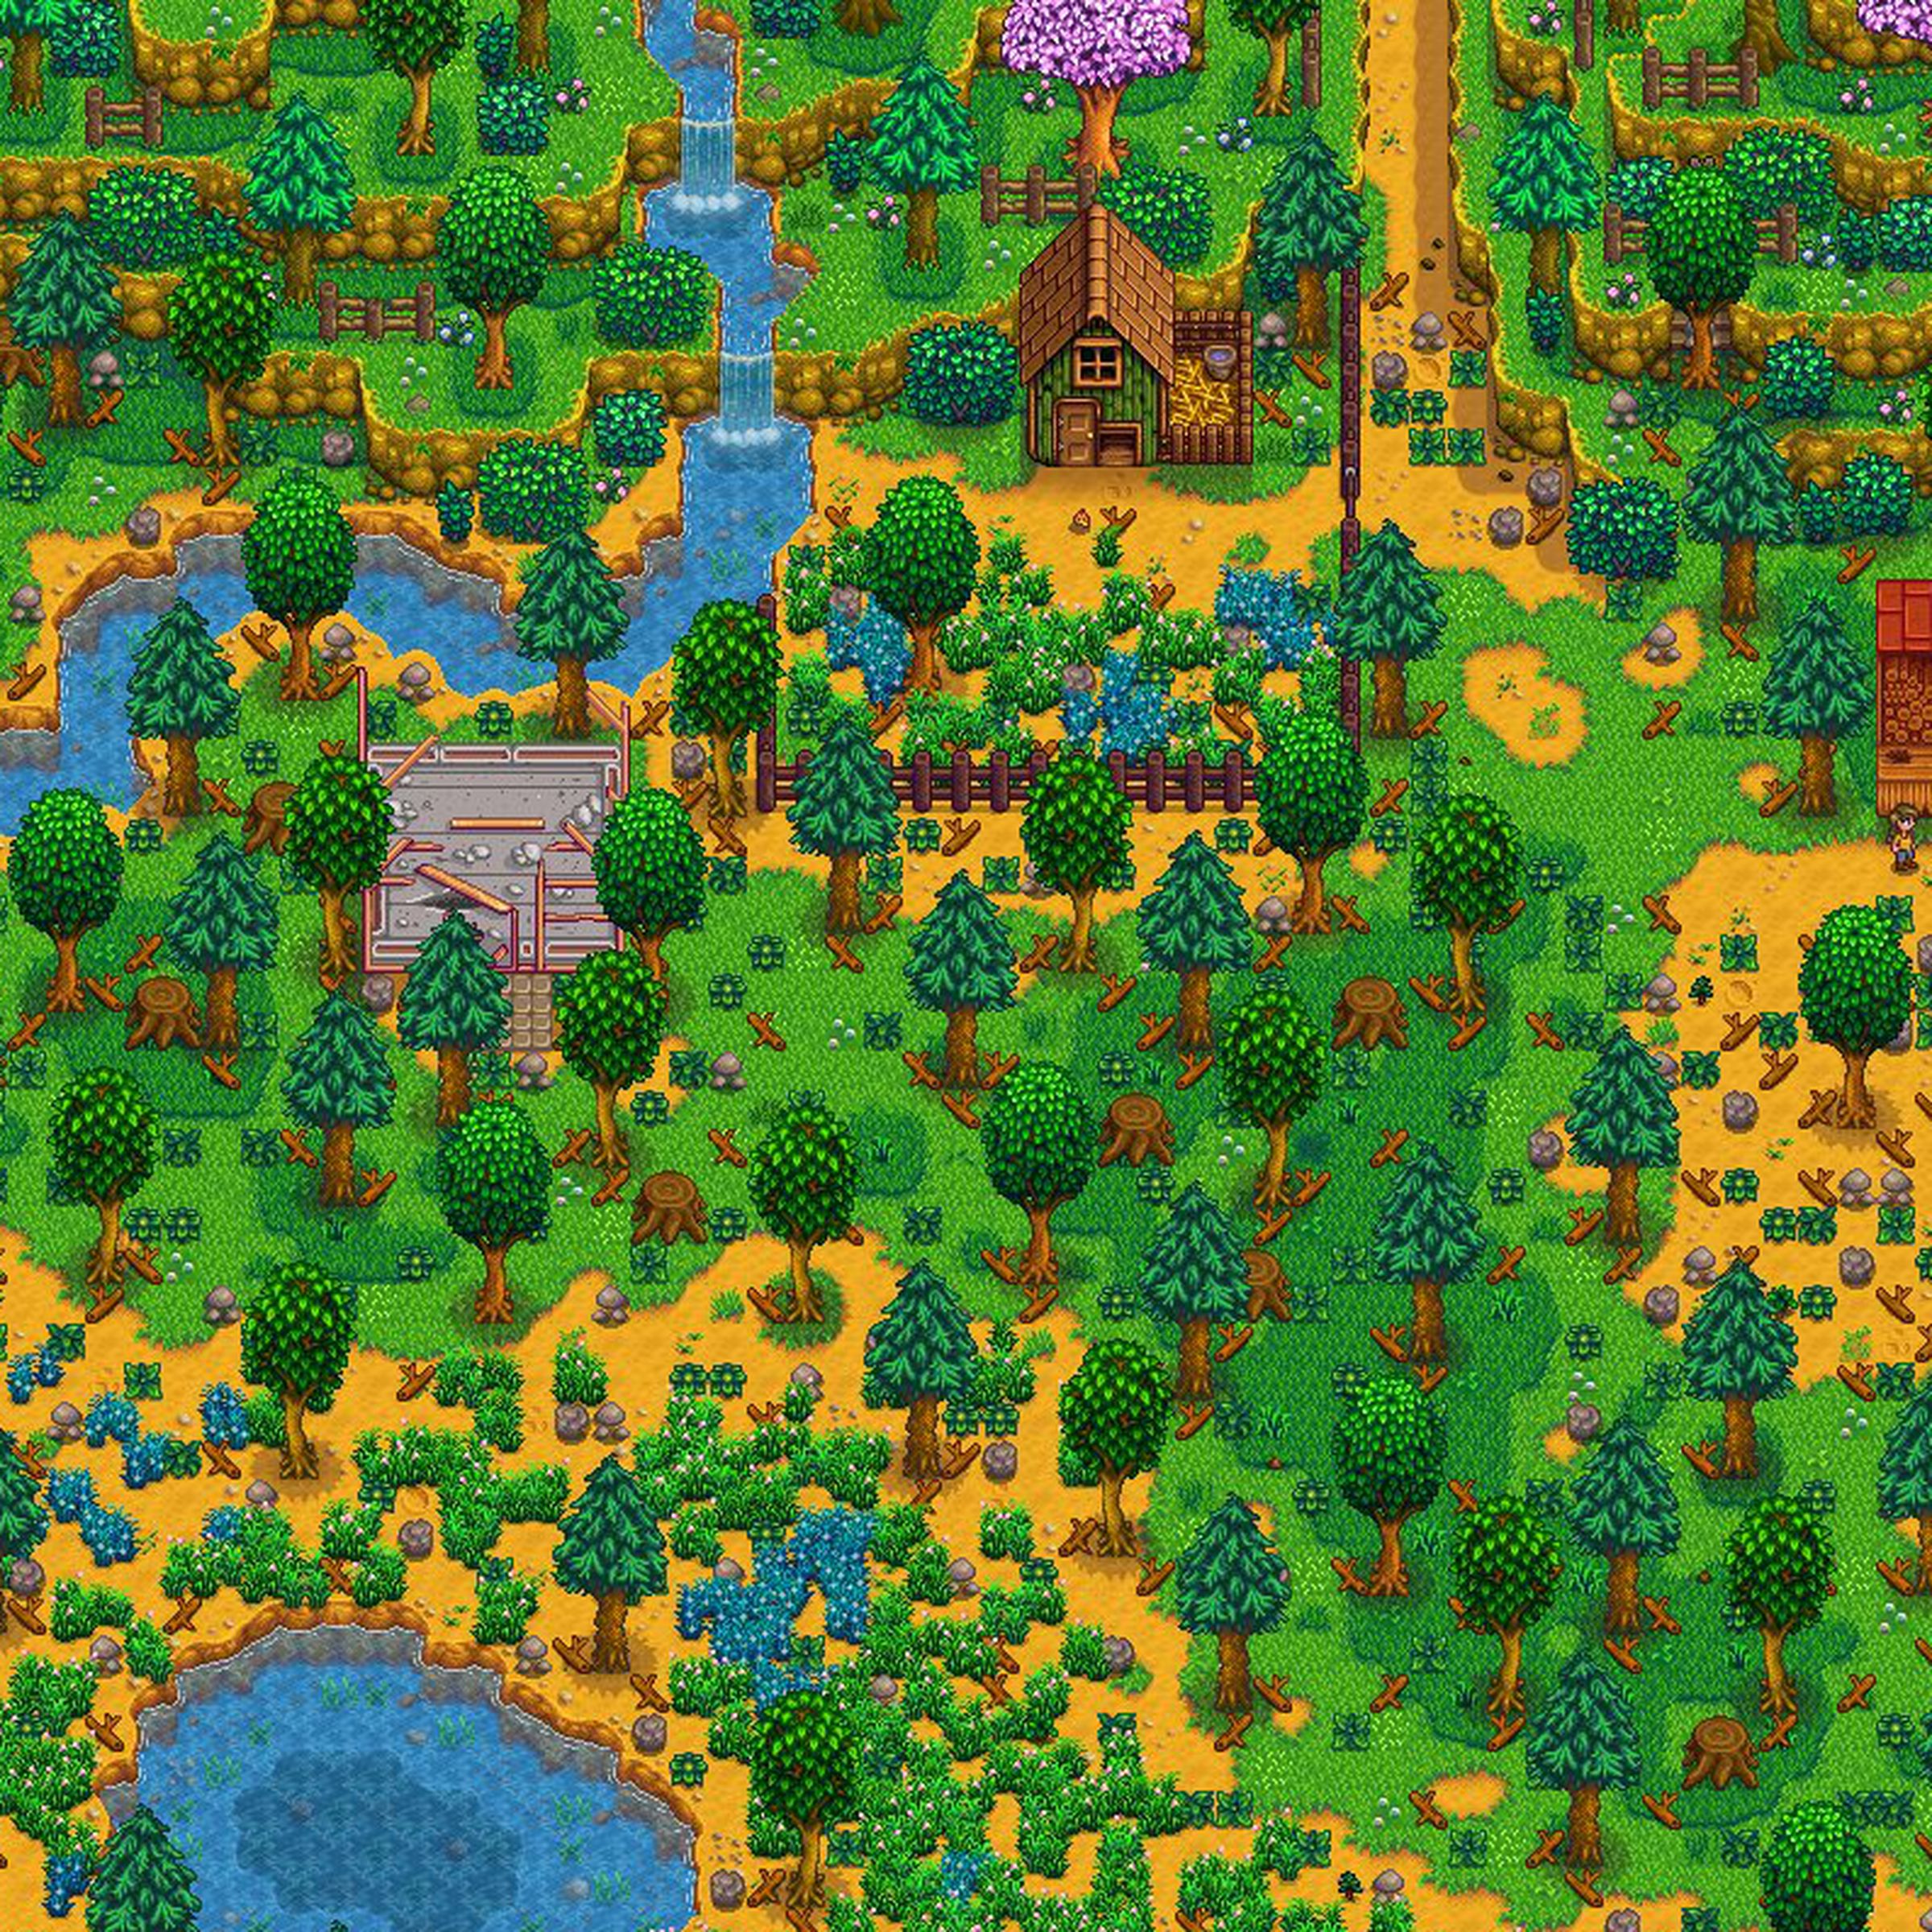 The new Meadowlands farm biome in Stardew Valley’s 1.6 update.